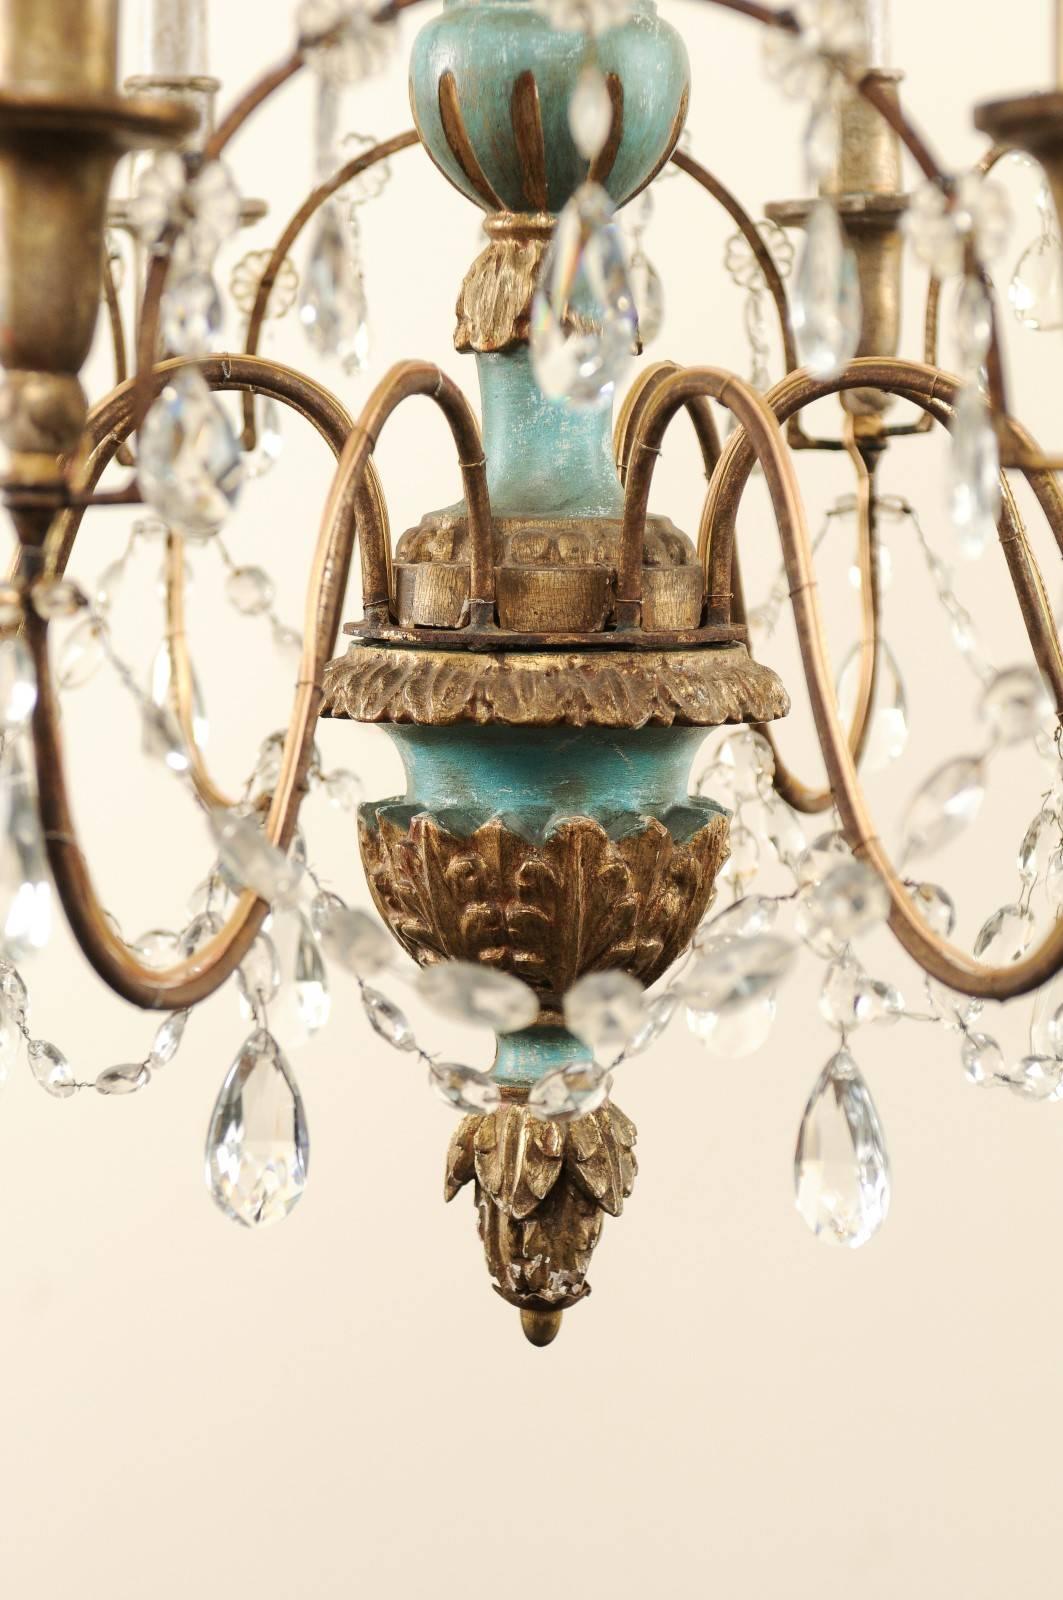 20th Century Midcentury Italian Eight-Light Crystal and Wood Chandelier with Pale Teal Tones